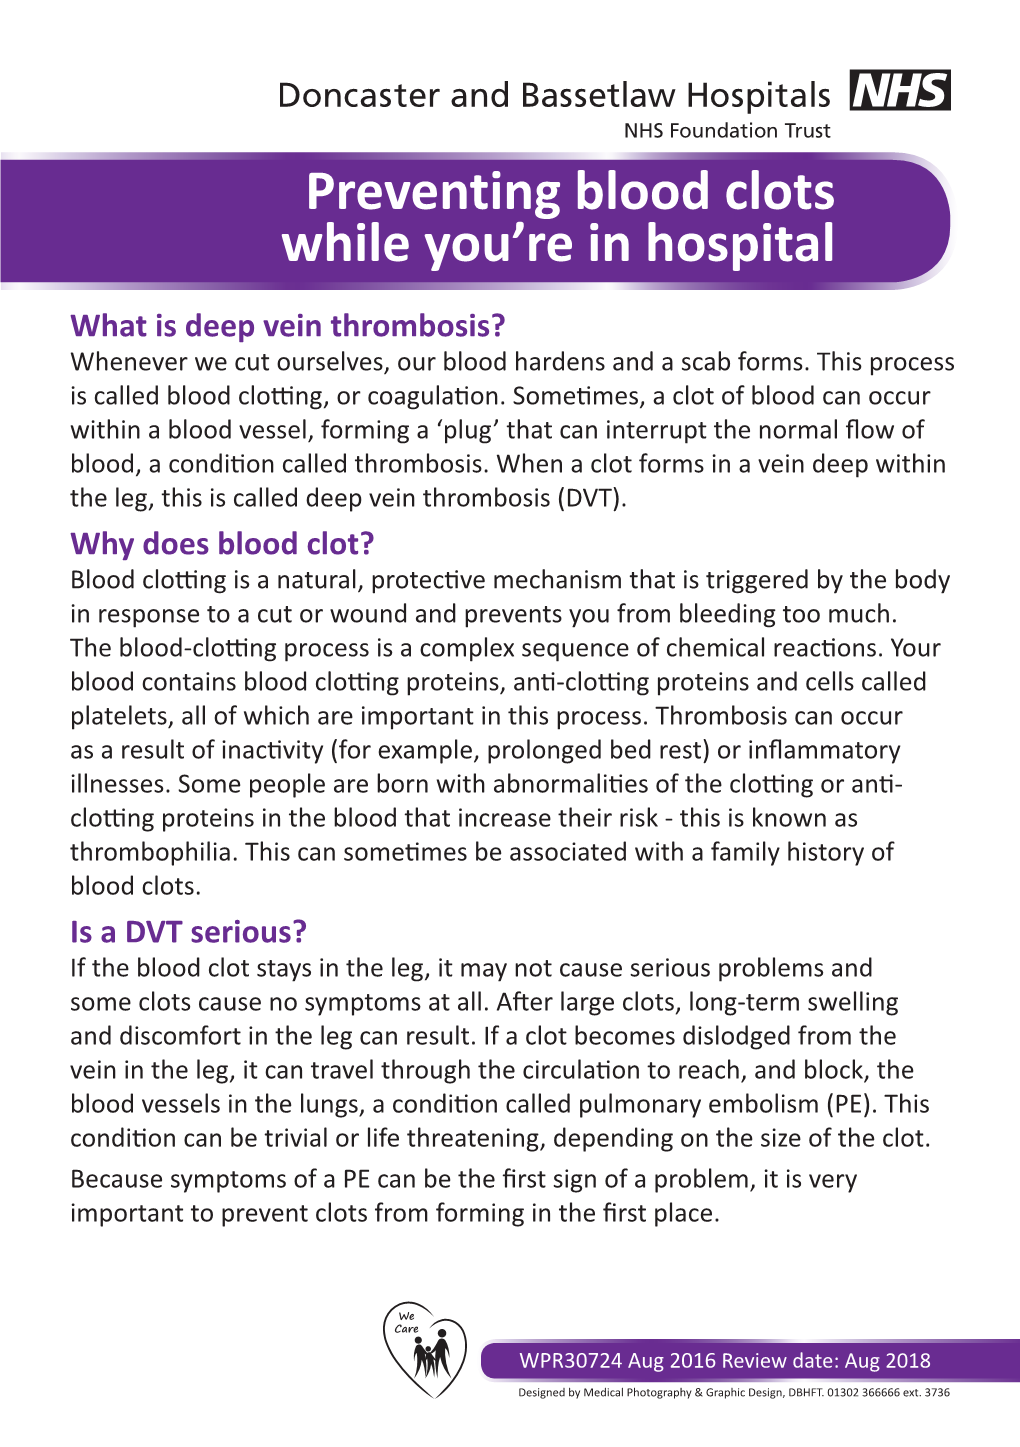 Preventing Blood Clots While You're in Hospital